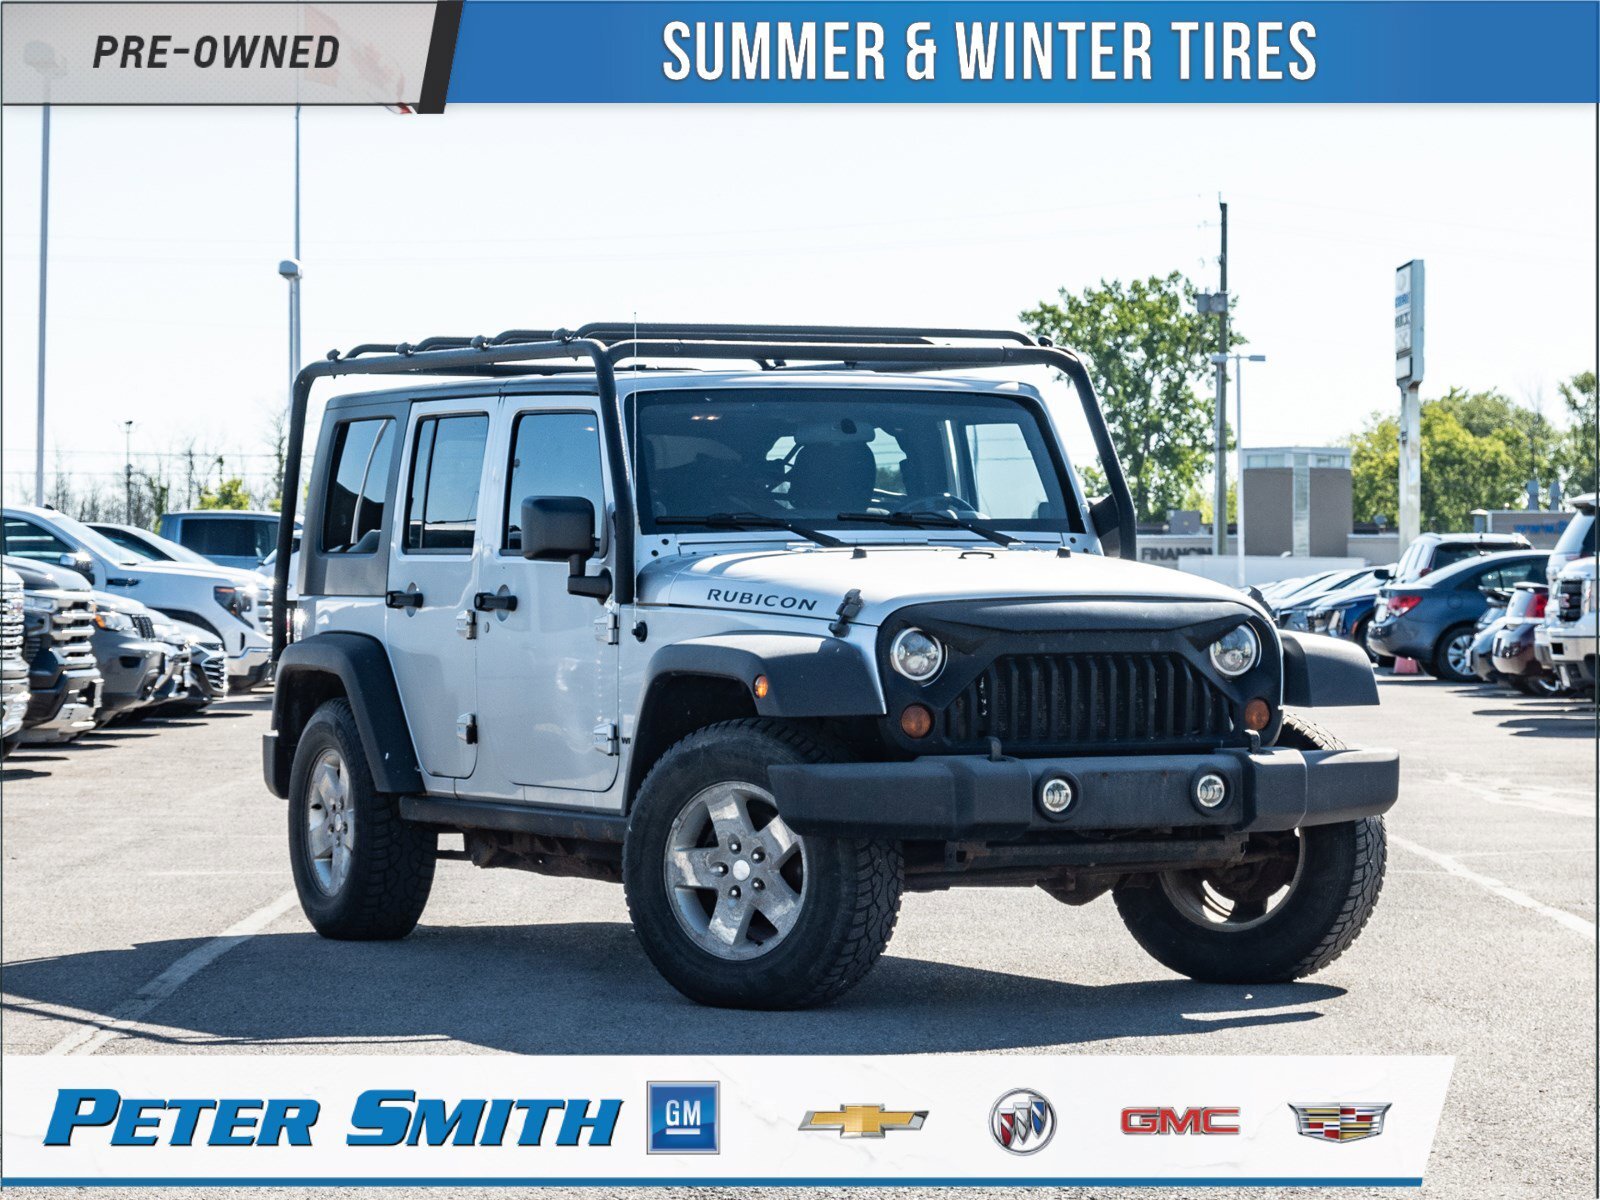 2010 Jeep WRANGLER UNLIMITED Rubicon - Manual | Summer & Winter Tires